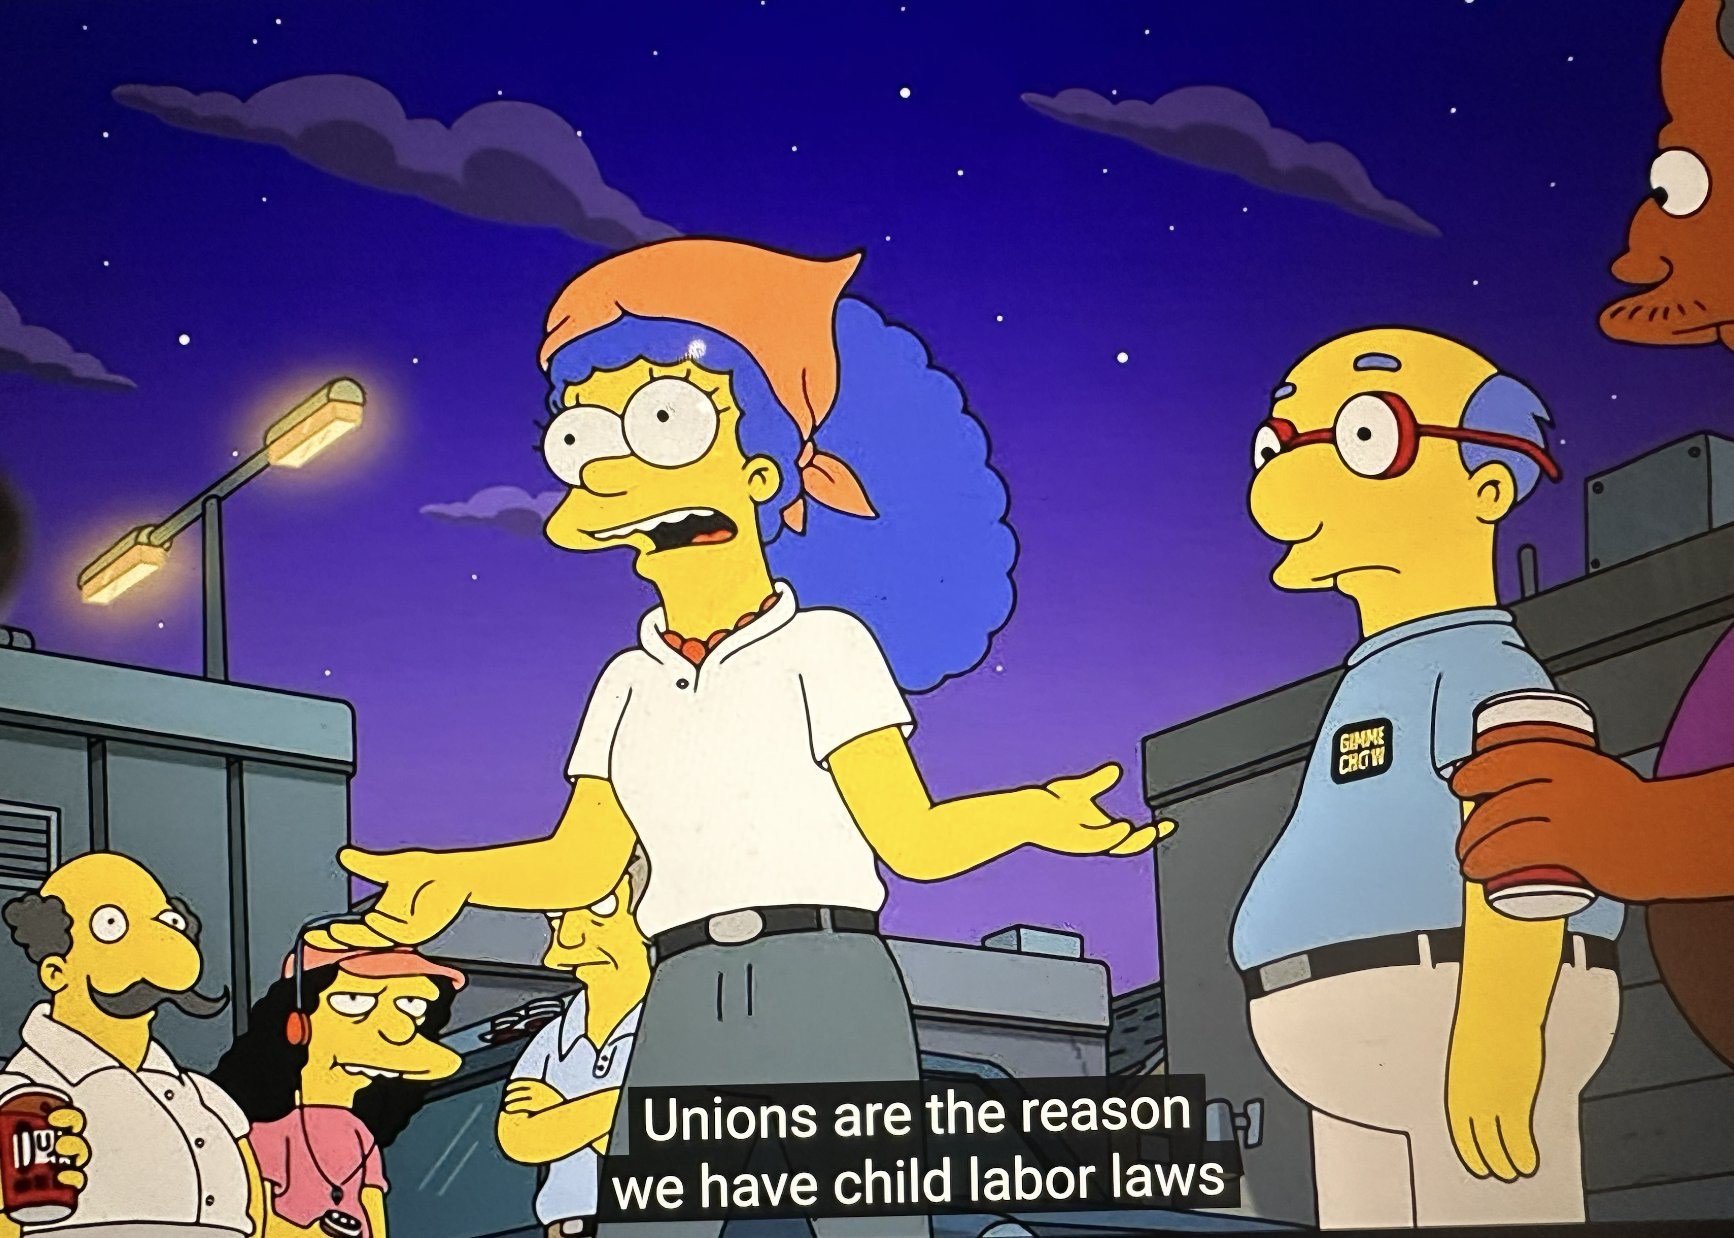 Did you catch the Night of the Living Wage #Simpsons episode that aired last week? Shout out to our union family in @animationguild who worked hard to create such an educational union-themed episode!